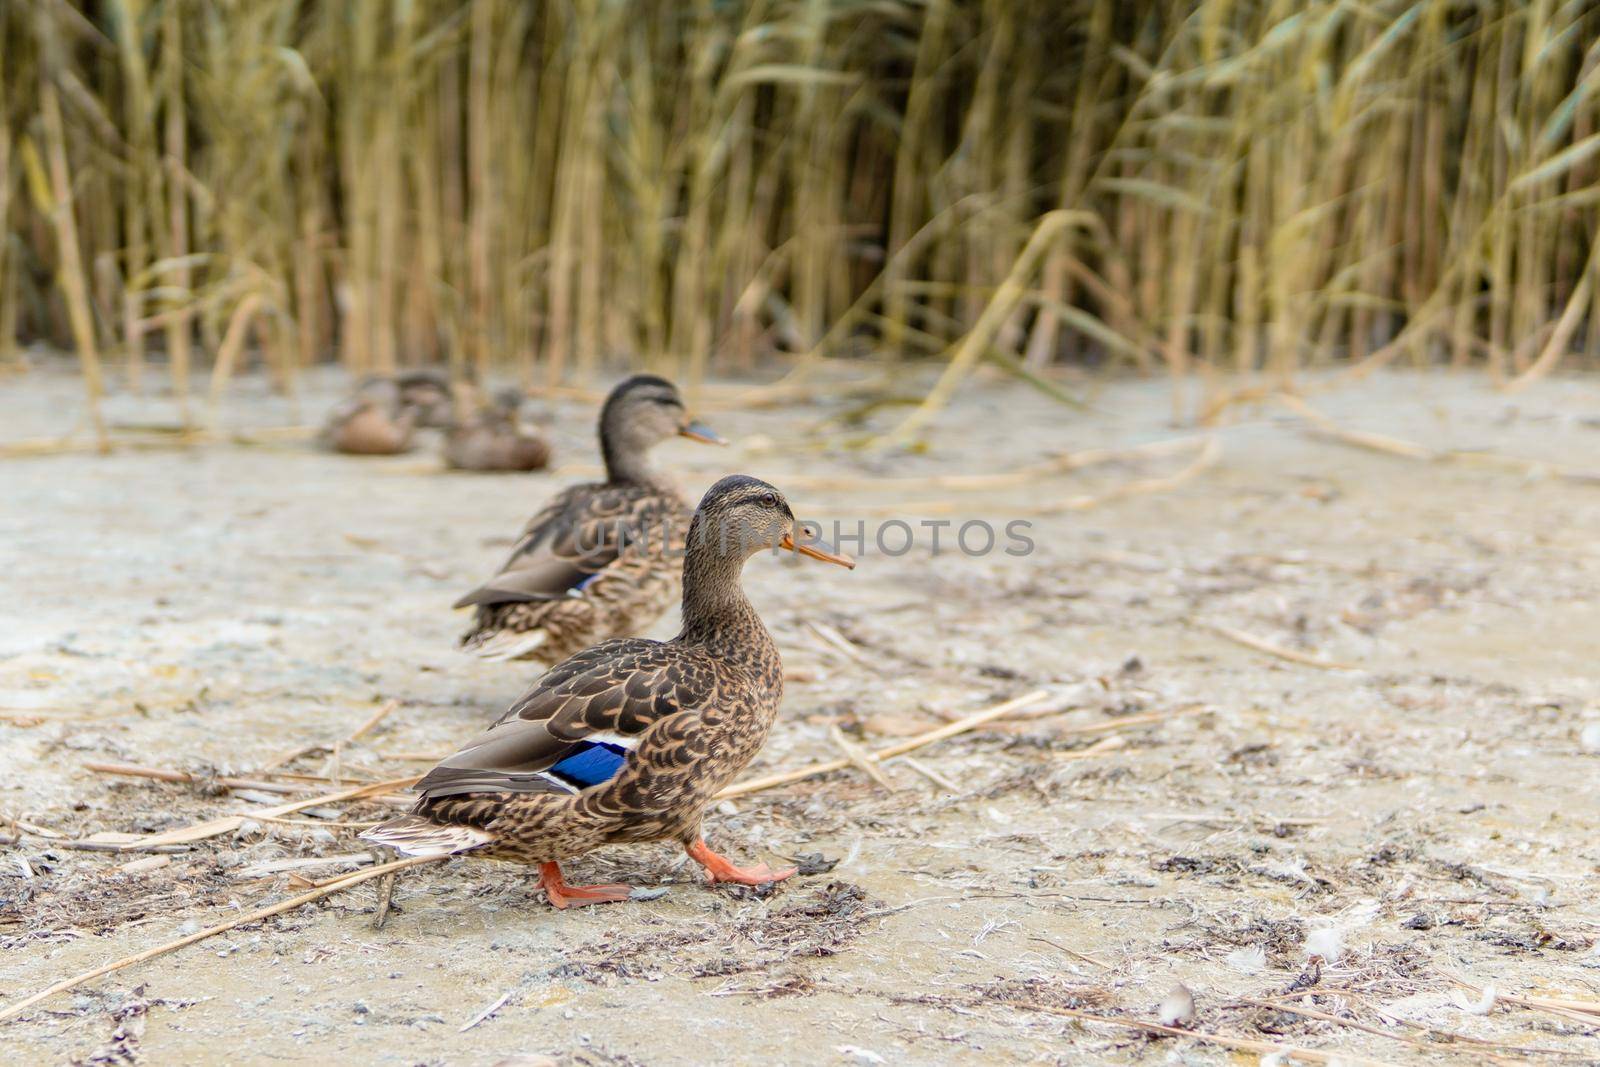 Ducks On The Beach 2 - In The Background Reeds. High quality photo